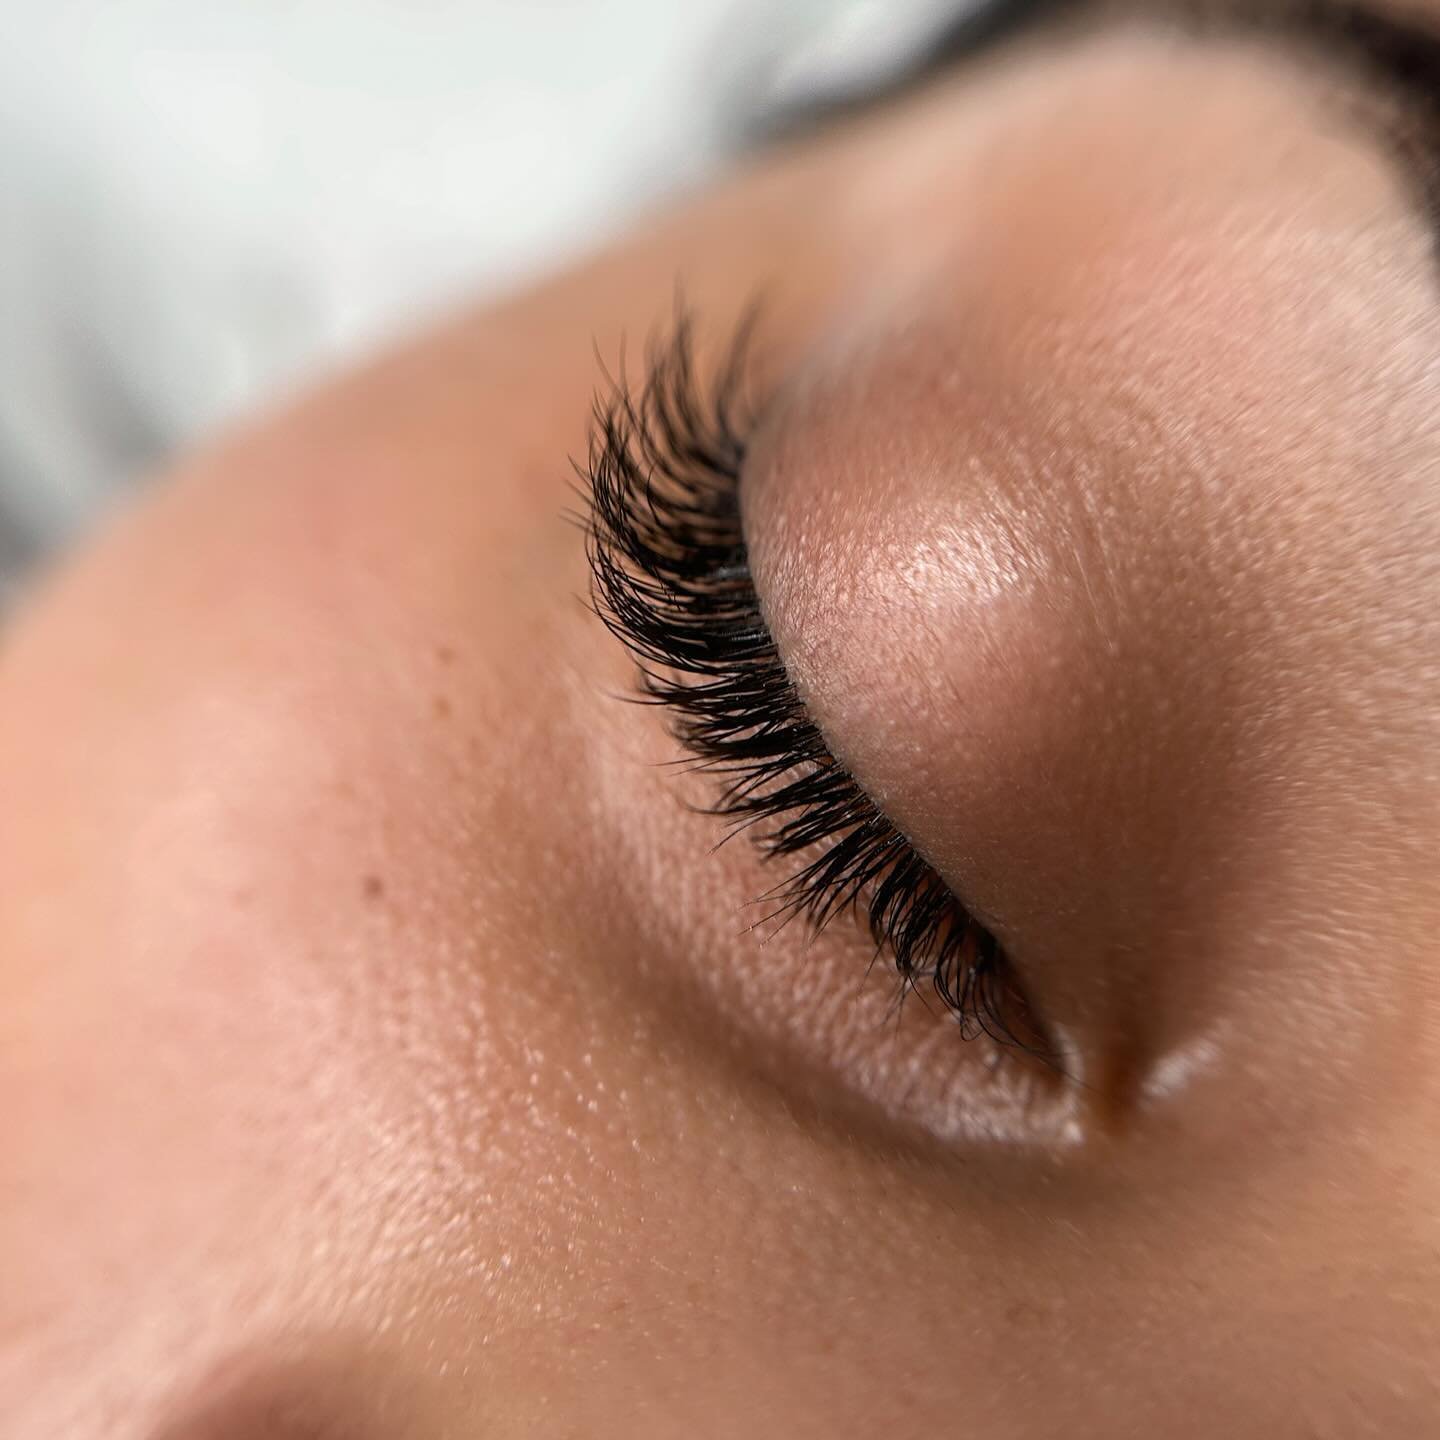 A lash tech v lash artists 🤺

Anyone can become qualified in Lash Extensions, but it&rsquo;s the artists that succeed. I take pride in being a lash artist. I see every eye as individual, there is no one size fits all when it comes to lash extensions